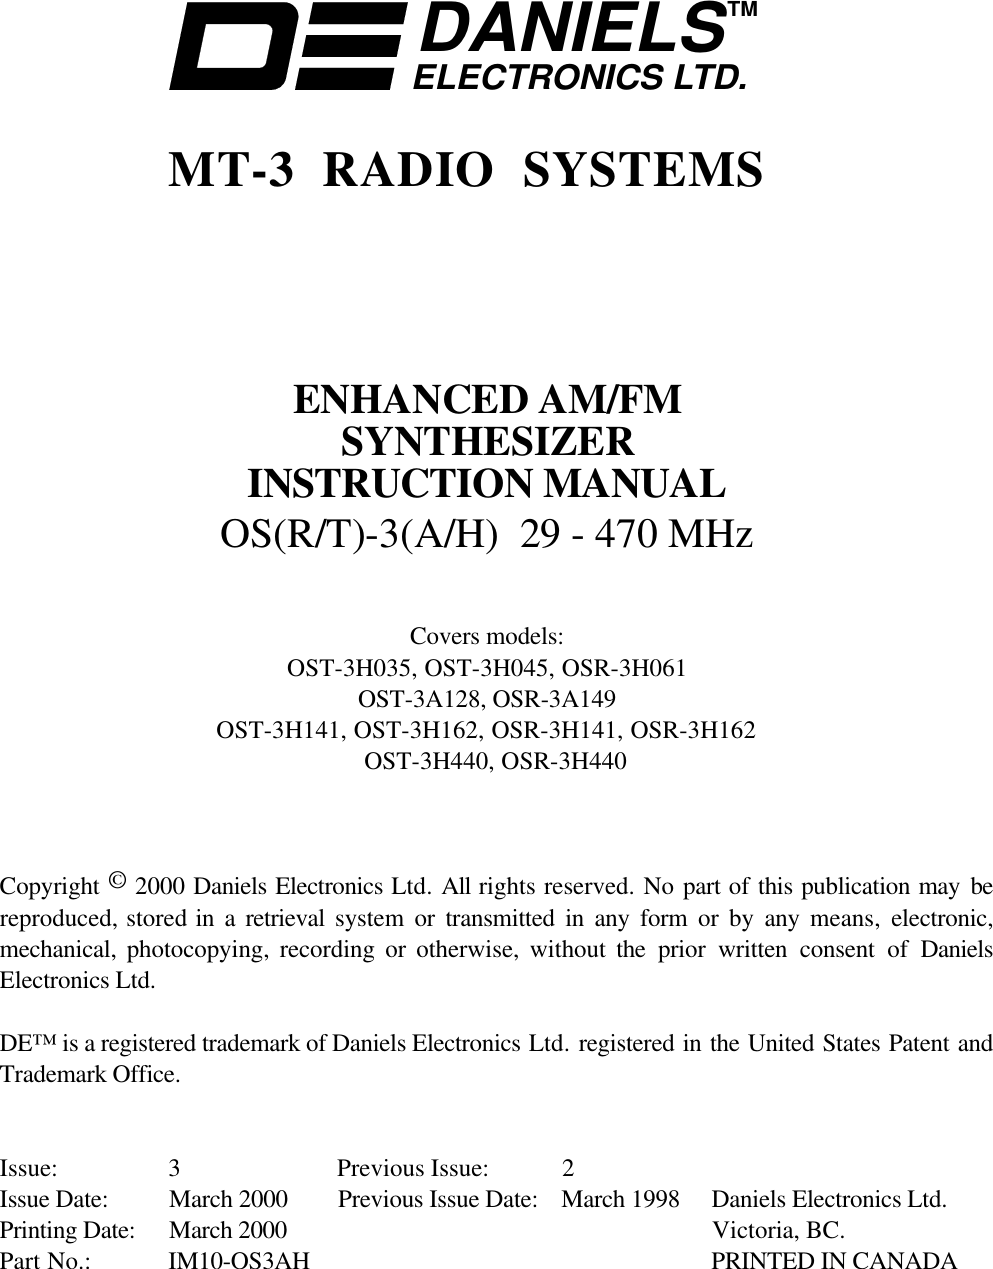 DANIELSELECTRONICS LTD.TMMT-3 RADIO SYSTEMSENHANCED AM/FMSYNTHESIZERINSTRUCTION MANUALOS(R/T)-3(A/H)  29 - 470 MHzCovers models:OST-3H035, OST-3H045, OSR-3H061OST-3A128, OSR-3A149OST-3H141, OST-3H162, OSR-3H141, OSR-3H162OST-3H440, OSR-3H440Copyright © 2000 Daniels Electronics Ltd. All rights reserved. No part of this publication may bereproduced, stored in a retrieval  system or transmitted in any form or by any means,  electronic,mechanical,  photocopying, recording or otherwise, without the  prior written consent of DanielsElectronics Ltd.DE™ is a registered trademark of Daniels Electronics Ltd. registered in the United States Patent andTrademark Office.Issue: 3 Previous Issue:  2Issue Date: March 2000 Previous Issue Date: March 1998 Daniels Electronics Ltd.Printing Date: March 2000 Victoria, BC.Part No.: IM10-OS3AH    PRINTED IN CANADA